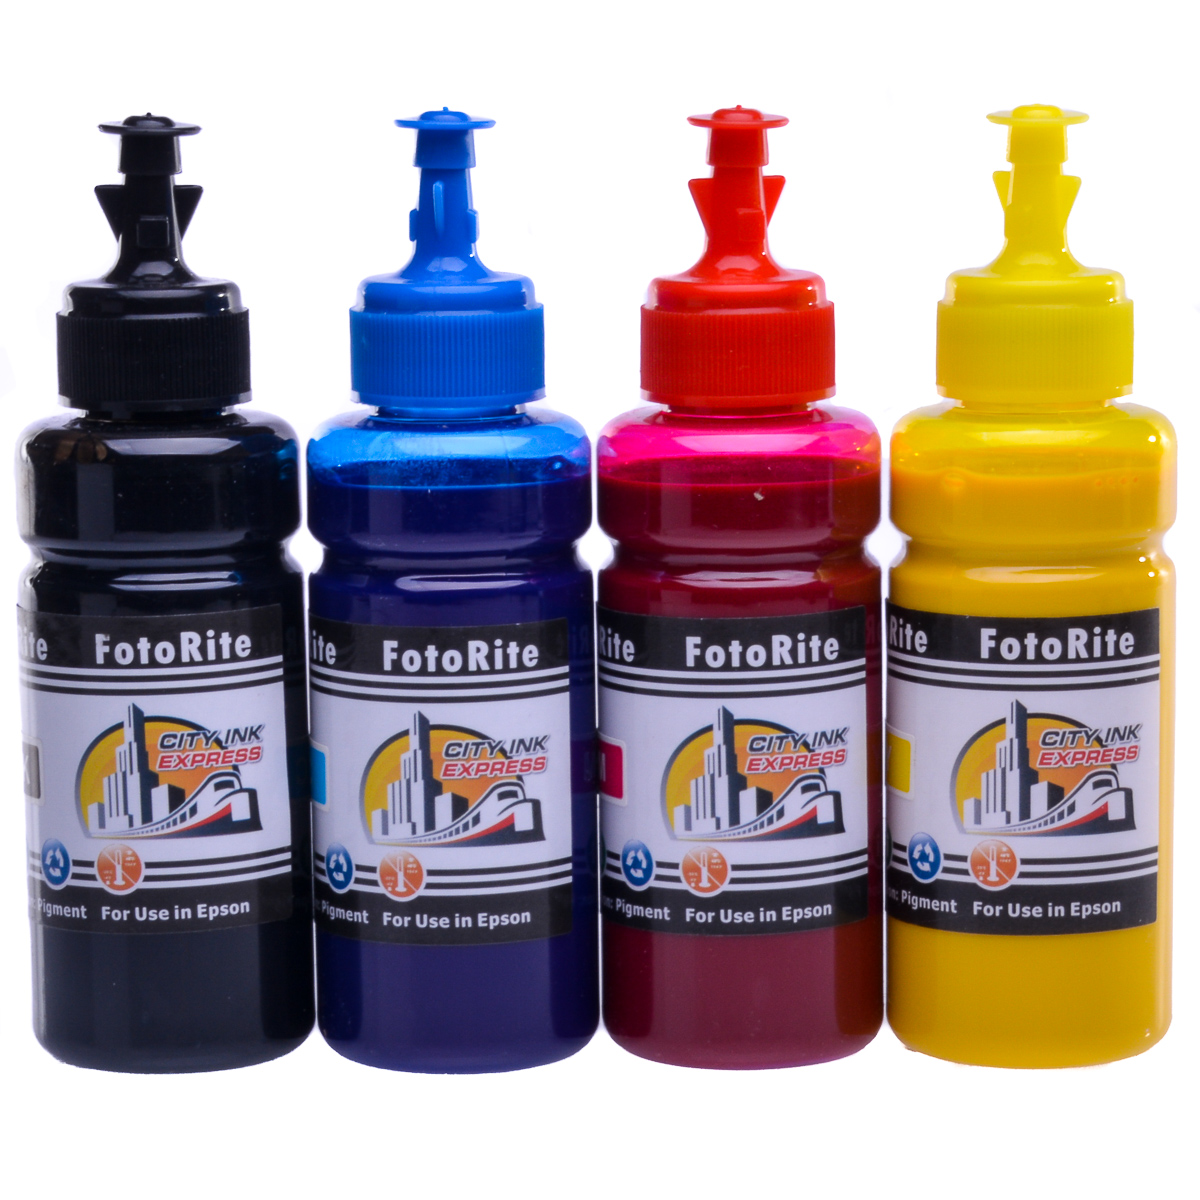 Cheap Multipack pigment ink refill replaces Epson XP-2150